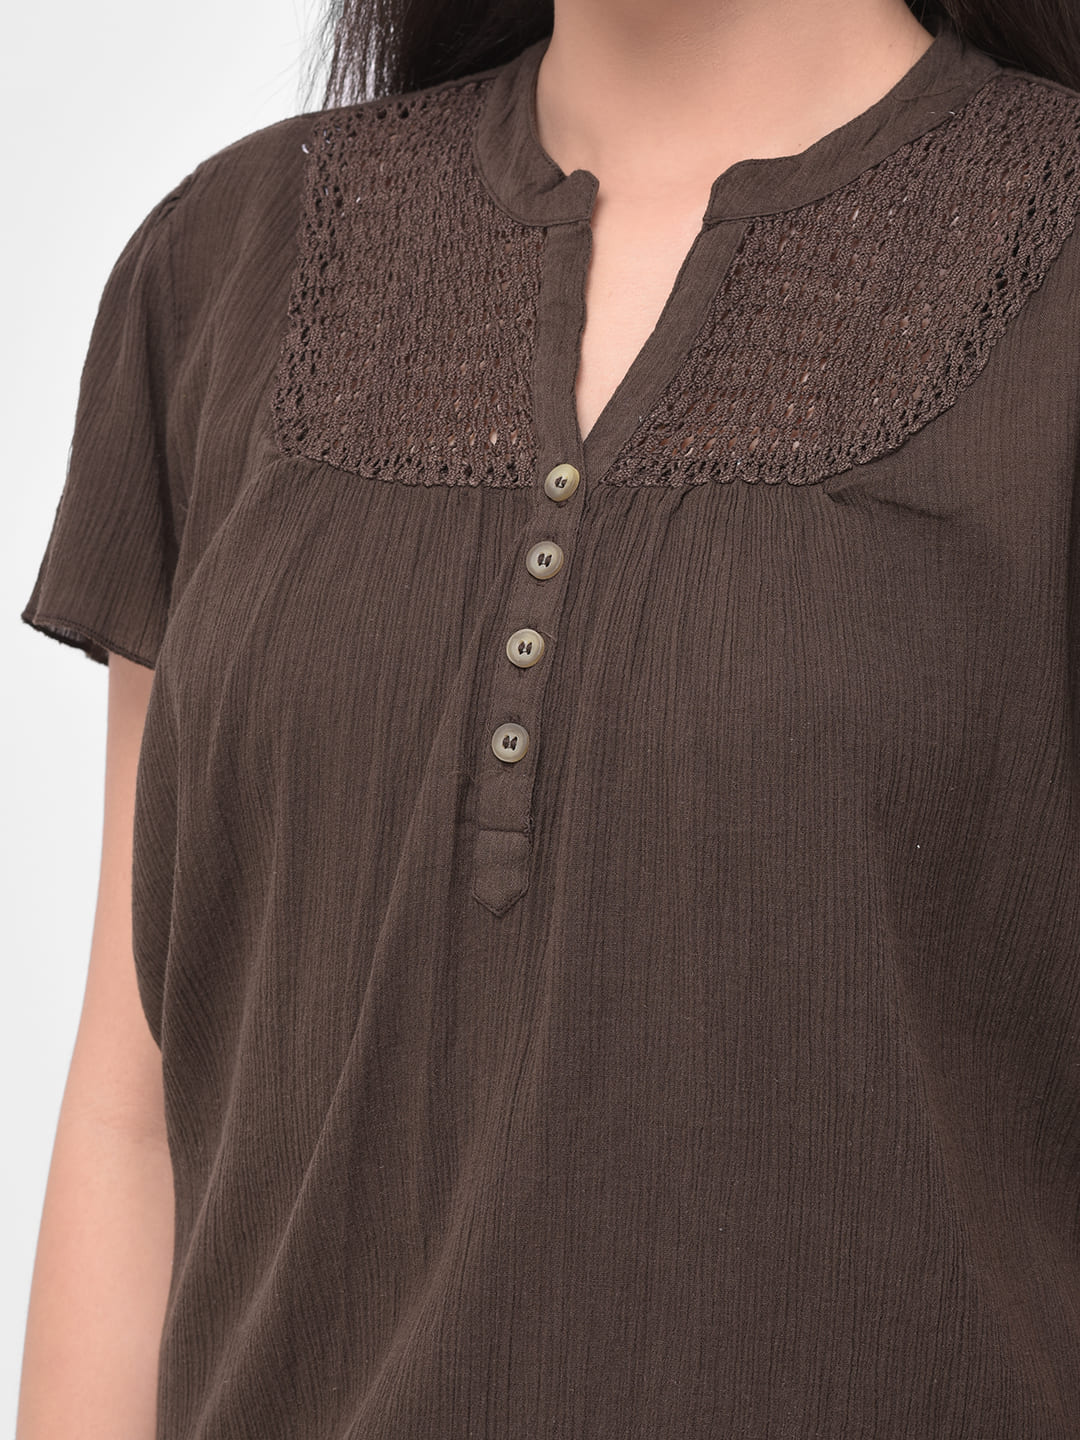 Solid Brown  Lace Top